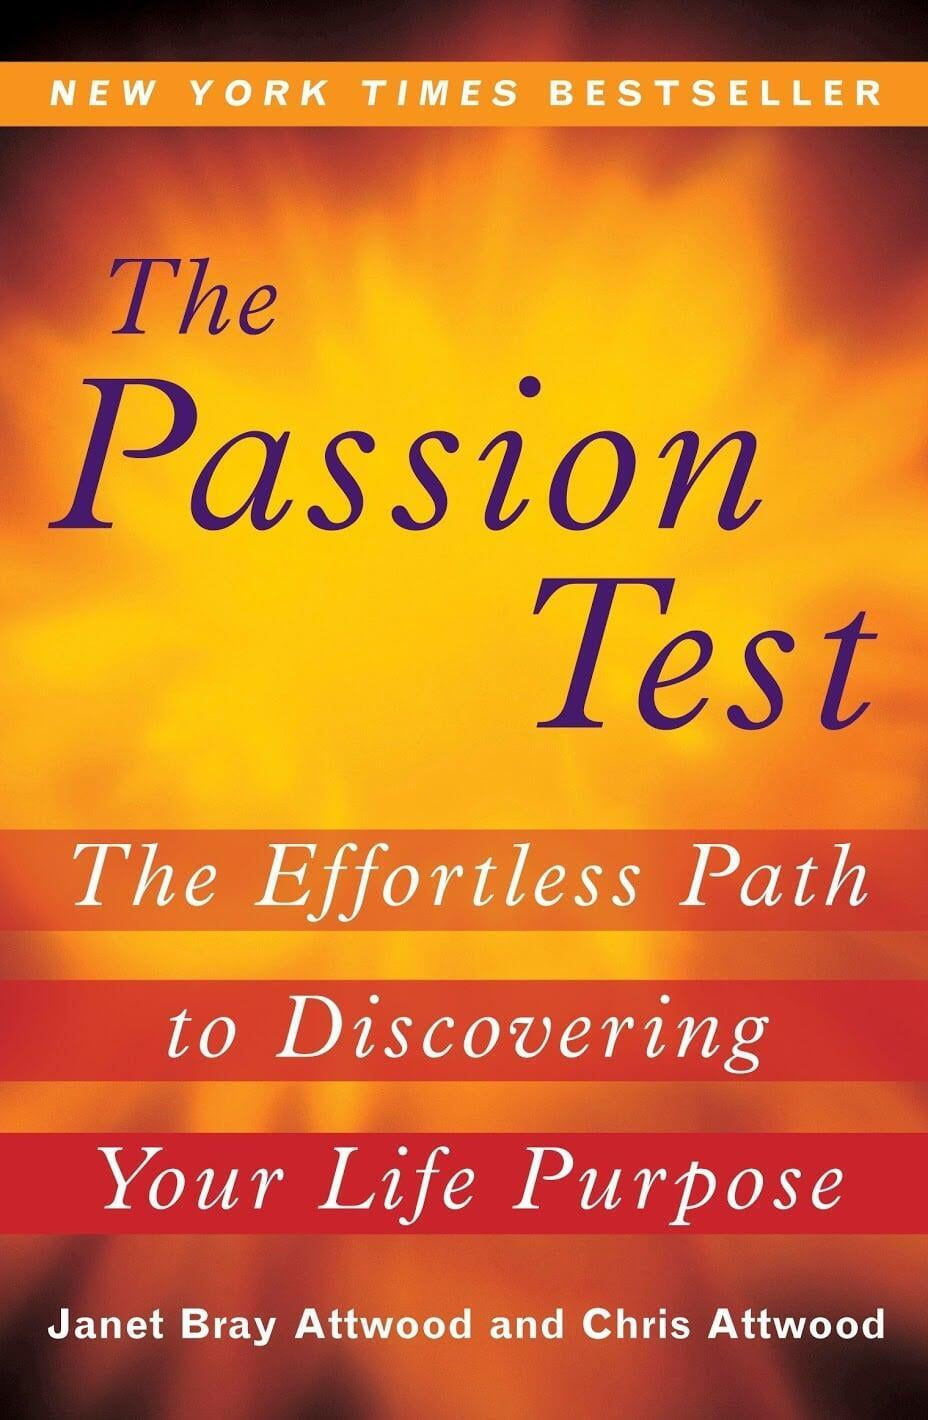 Passion Test Book cover. Effortless Path to Discovering Your Life Purpose